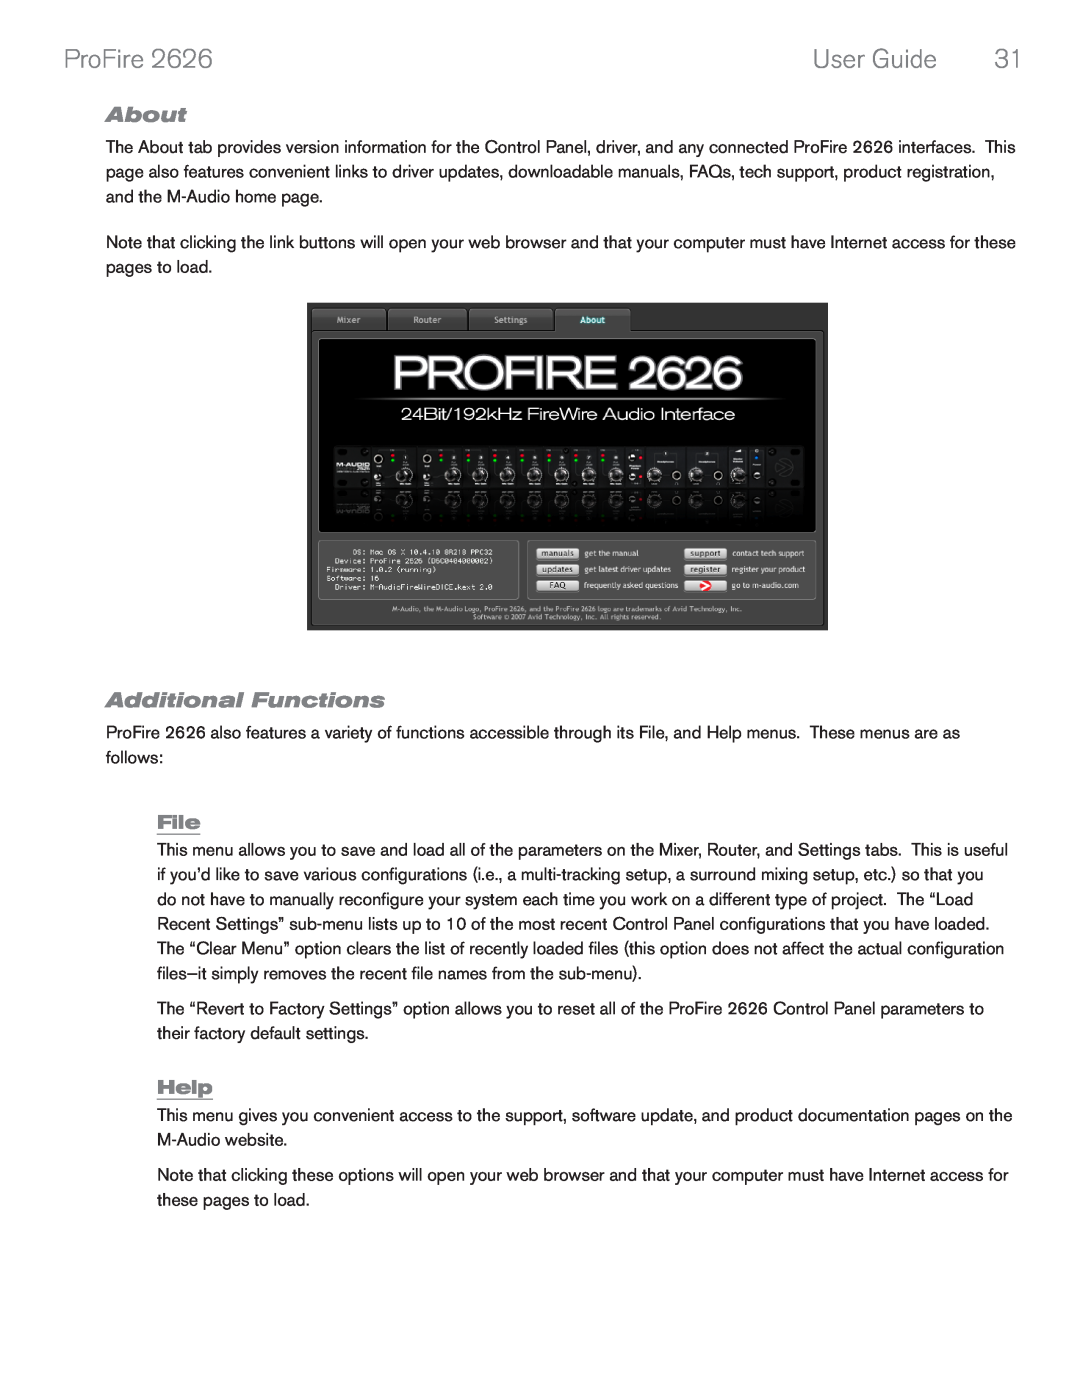 M-Audio 2626 manual About, Additional Functions, File, Help, ProFire, User Guide 